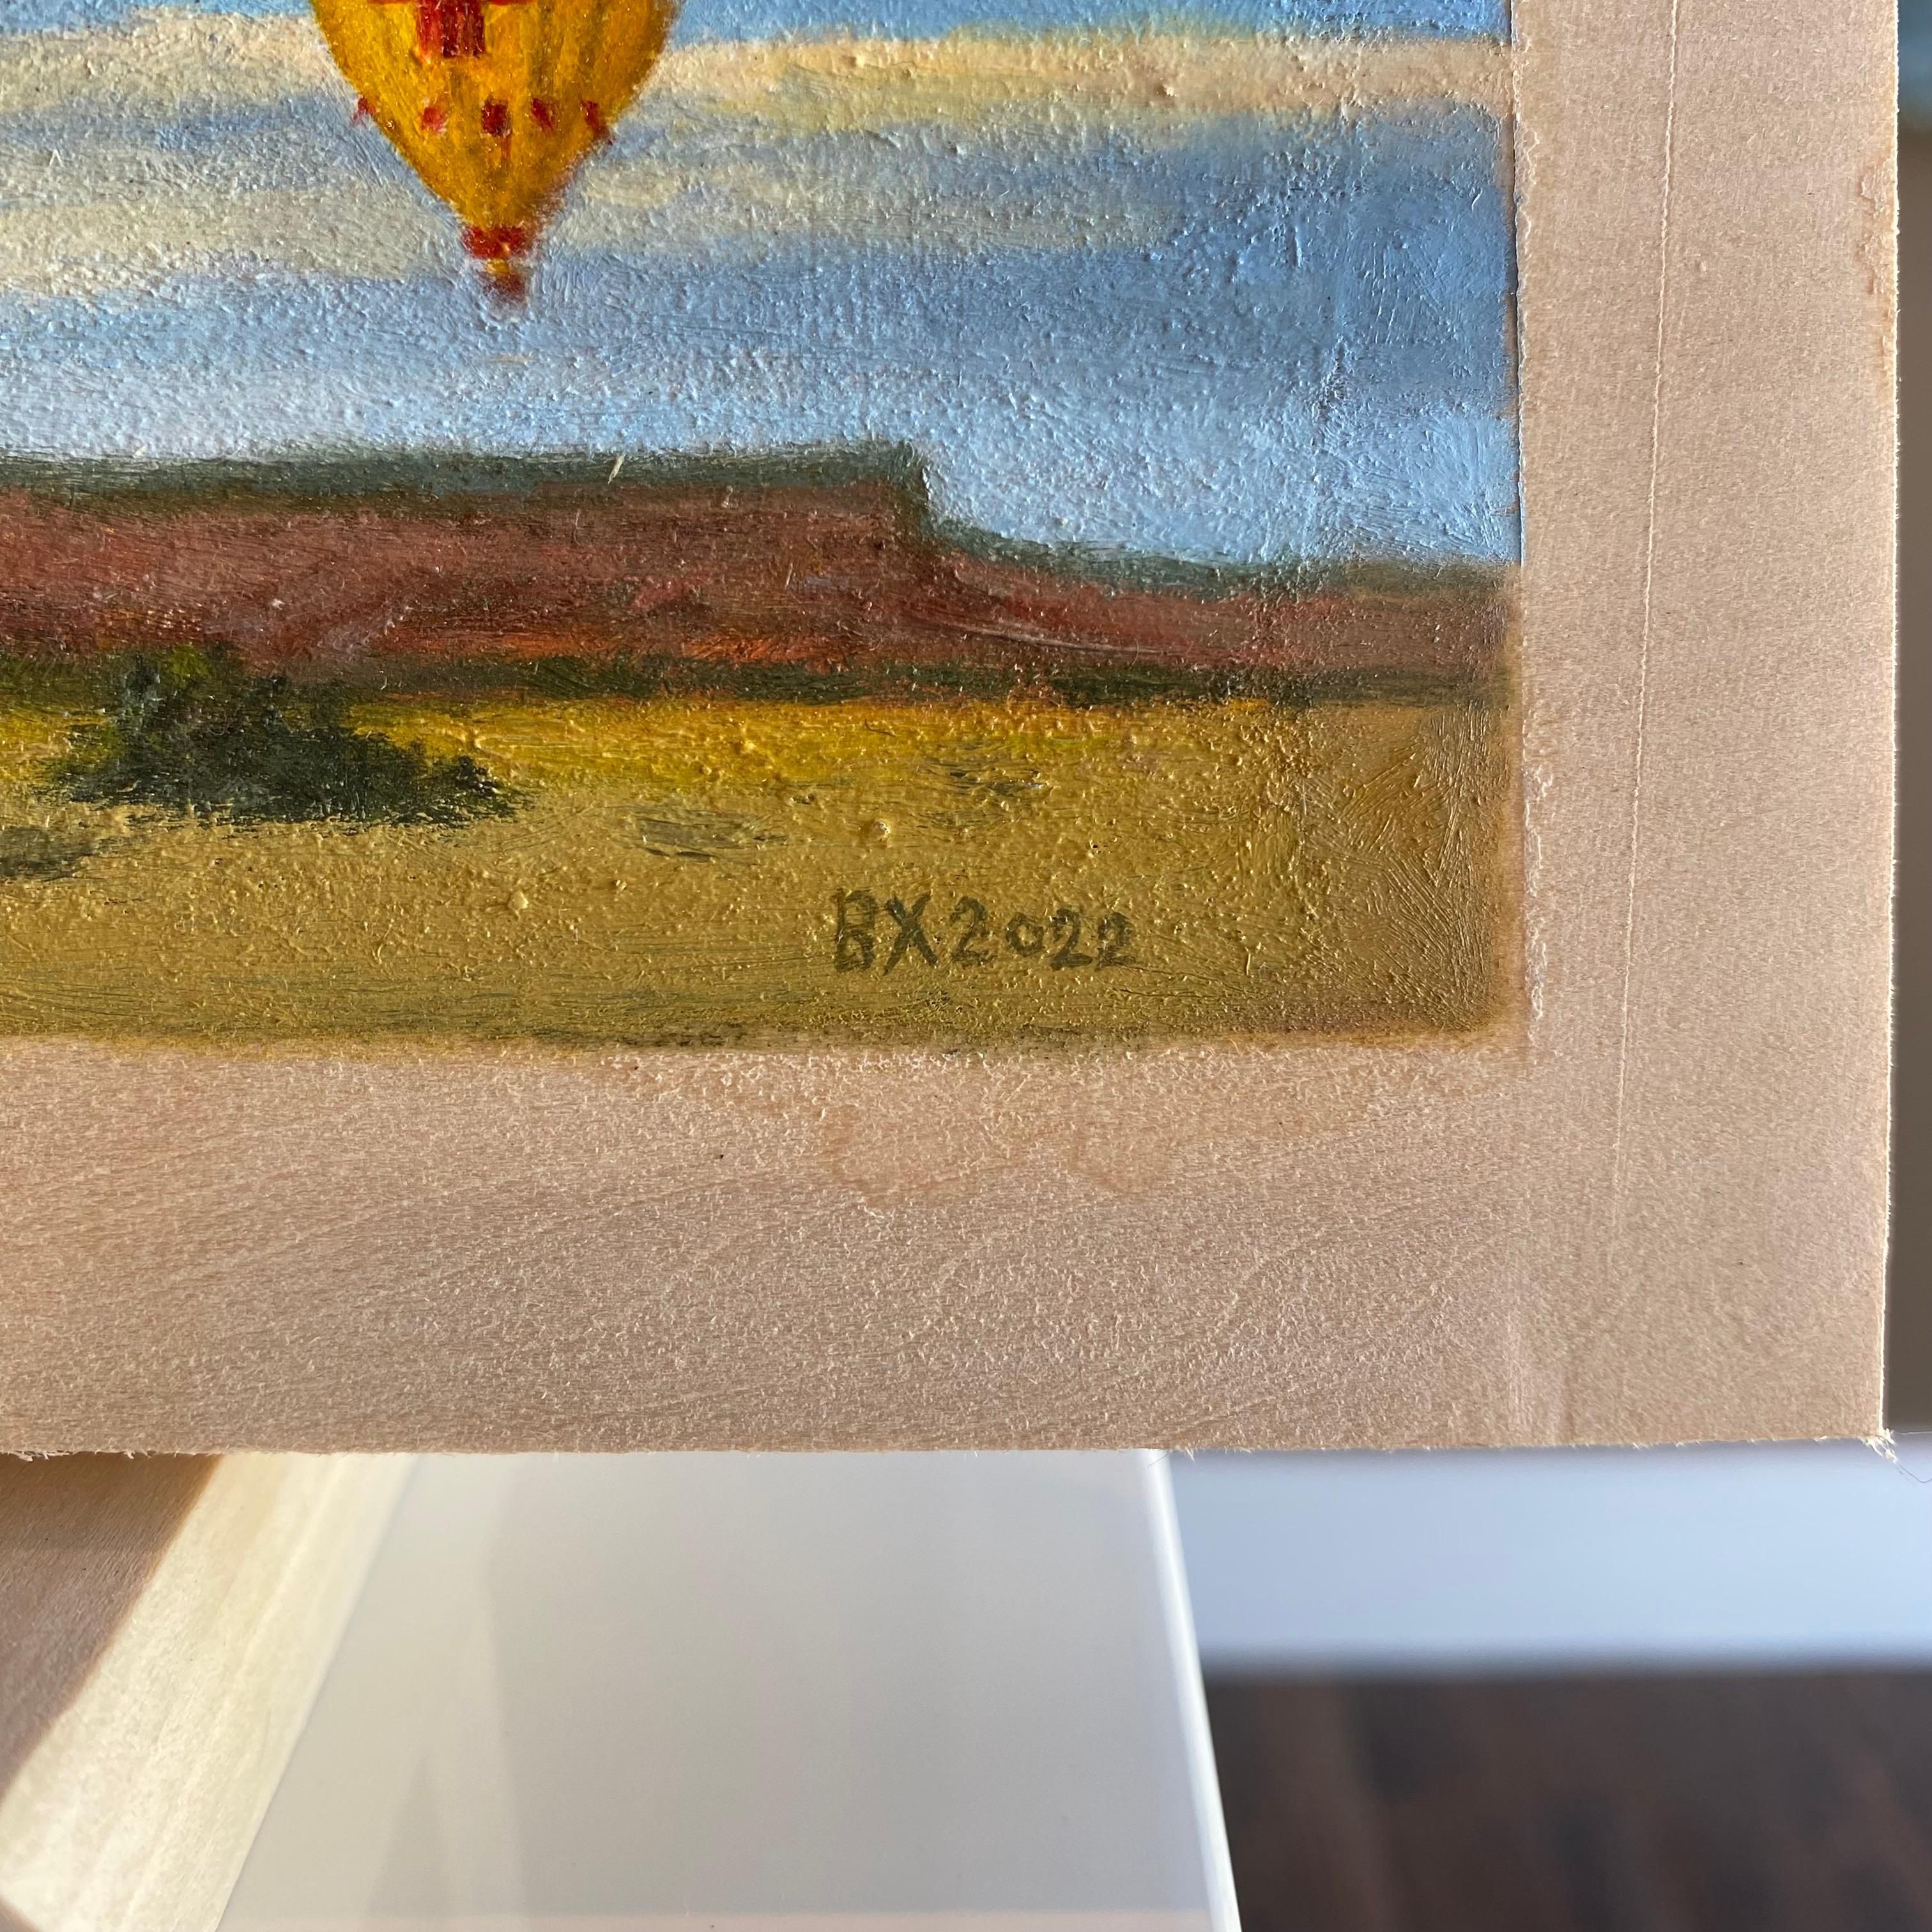 Ben Xu's Soaring Through The Summer Air is an oil painting created on a basswood plank. The painting is sized at 5.2 x 12 x 0.7 inches, and priced at $400. The painting is signed by the artist himself, with the signature placed on the lower right